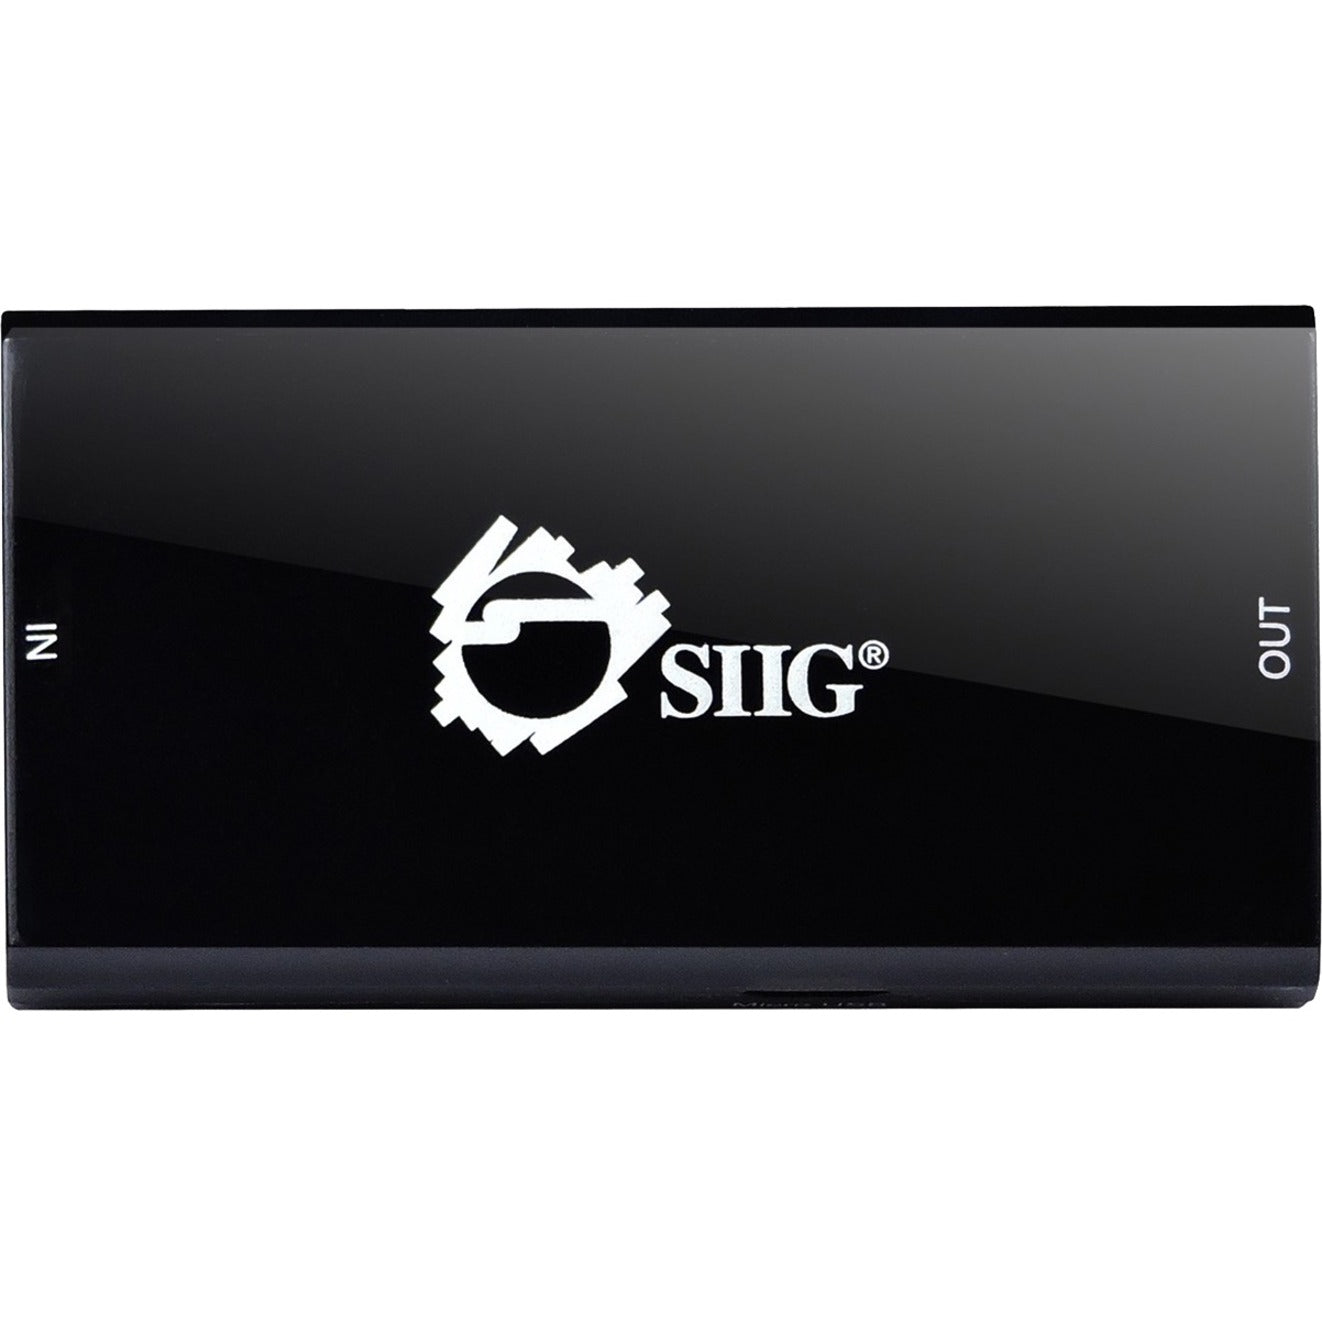 SIIG CE-H22J14-S1 HDMI 2.0 Repeater - 4Kx2K 60Hz USB RoHS Certified